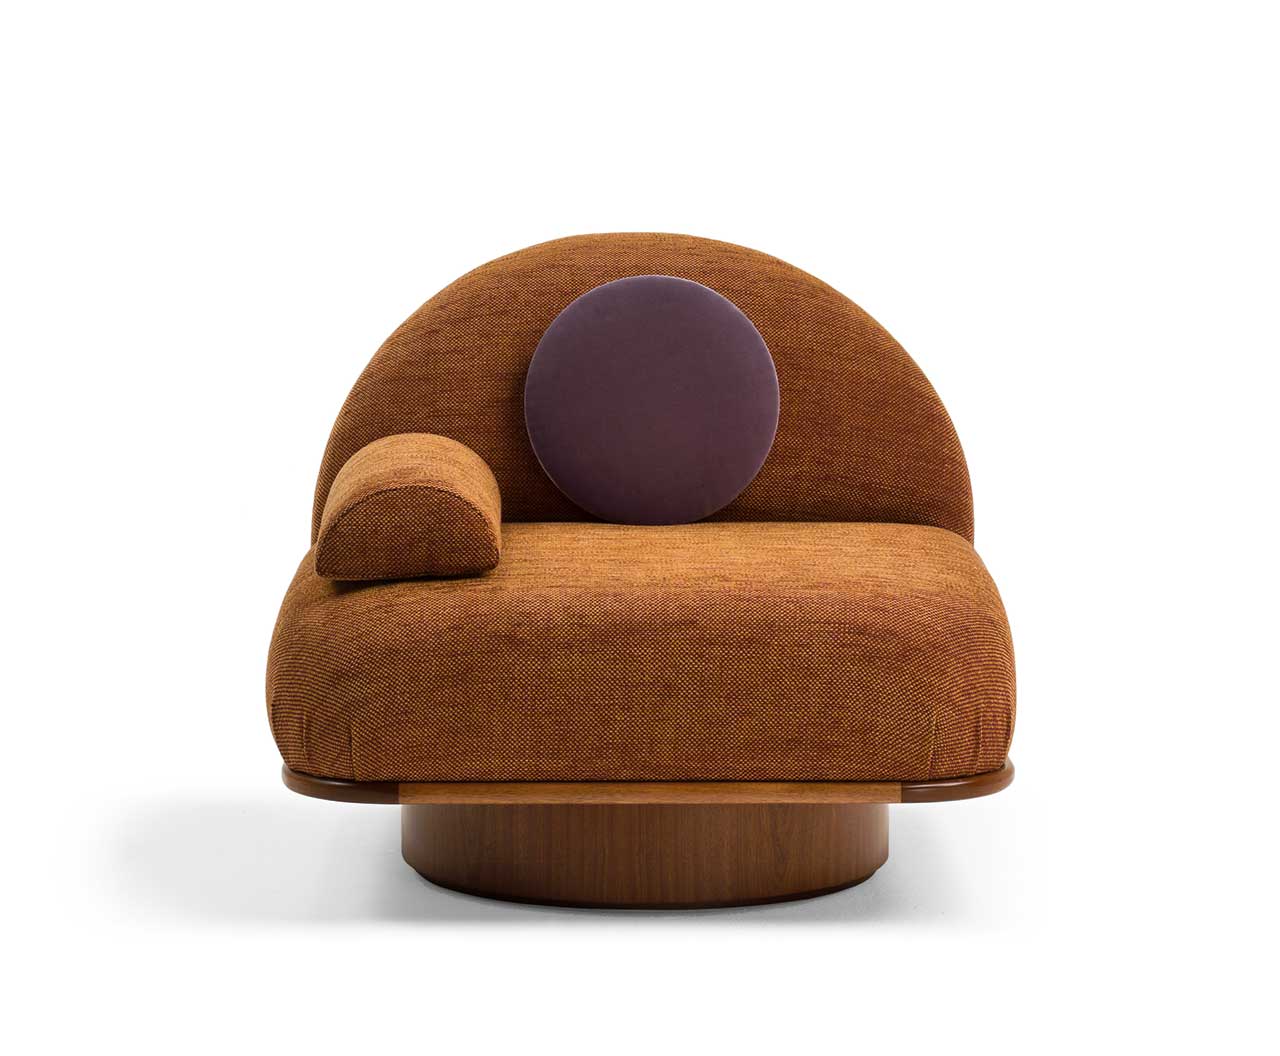 The Thumb Chair: A Playful Design With Maximum Comfort